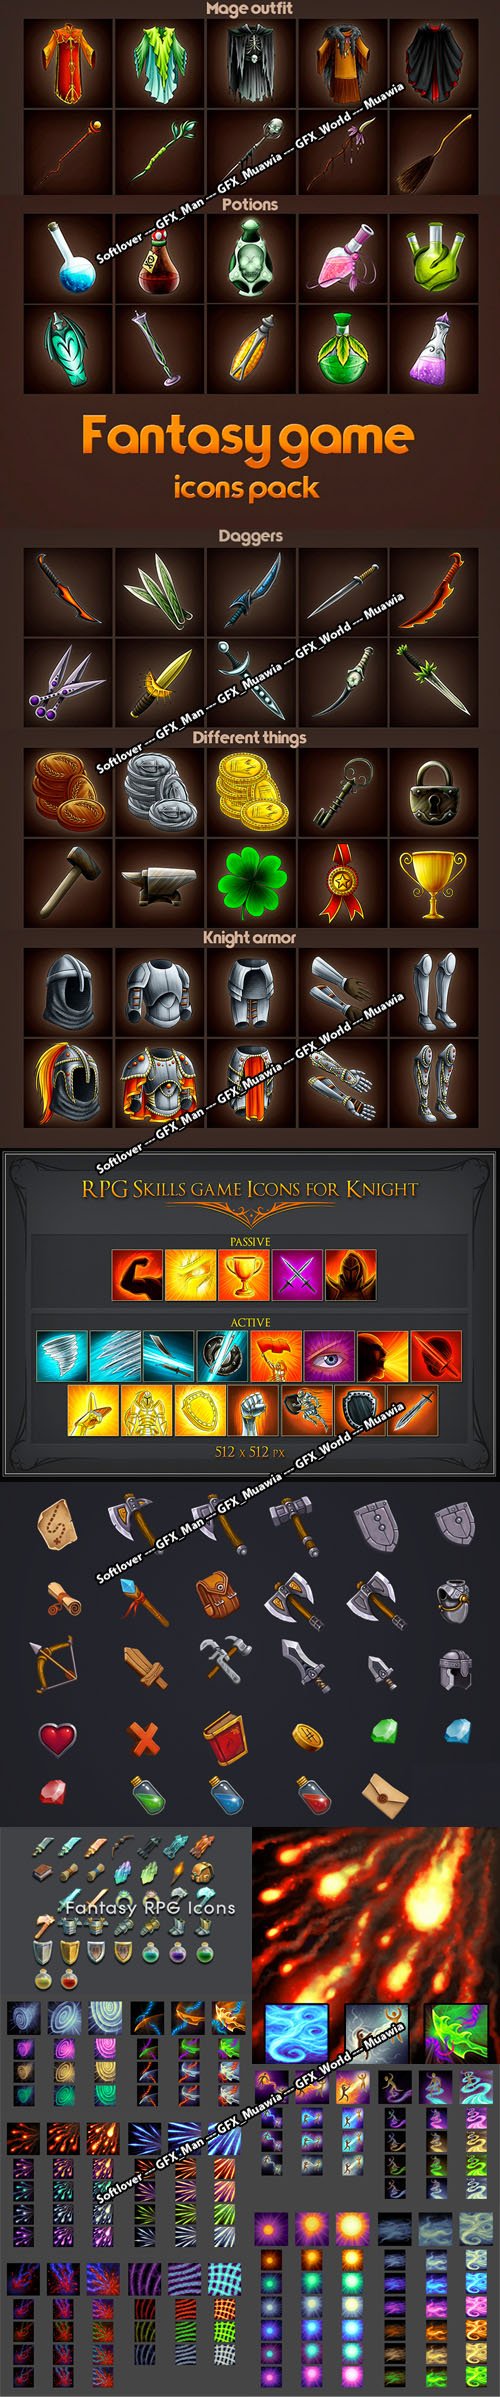 Fantasy RPG Game Icons Pack in PSD [PSD/PNG/JPG]